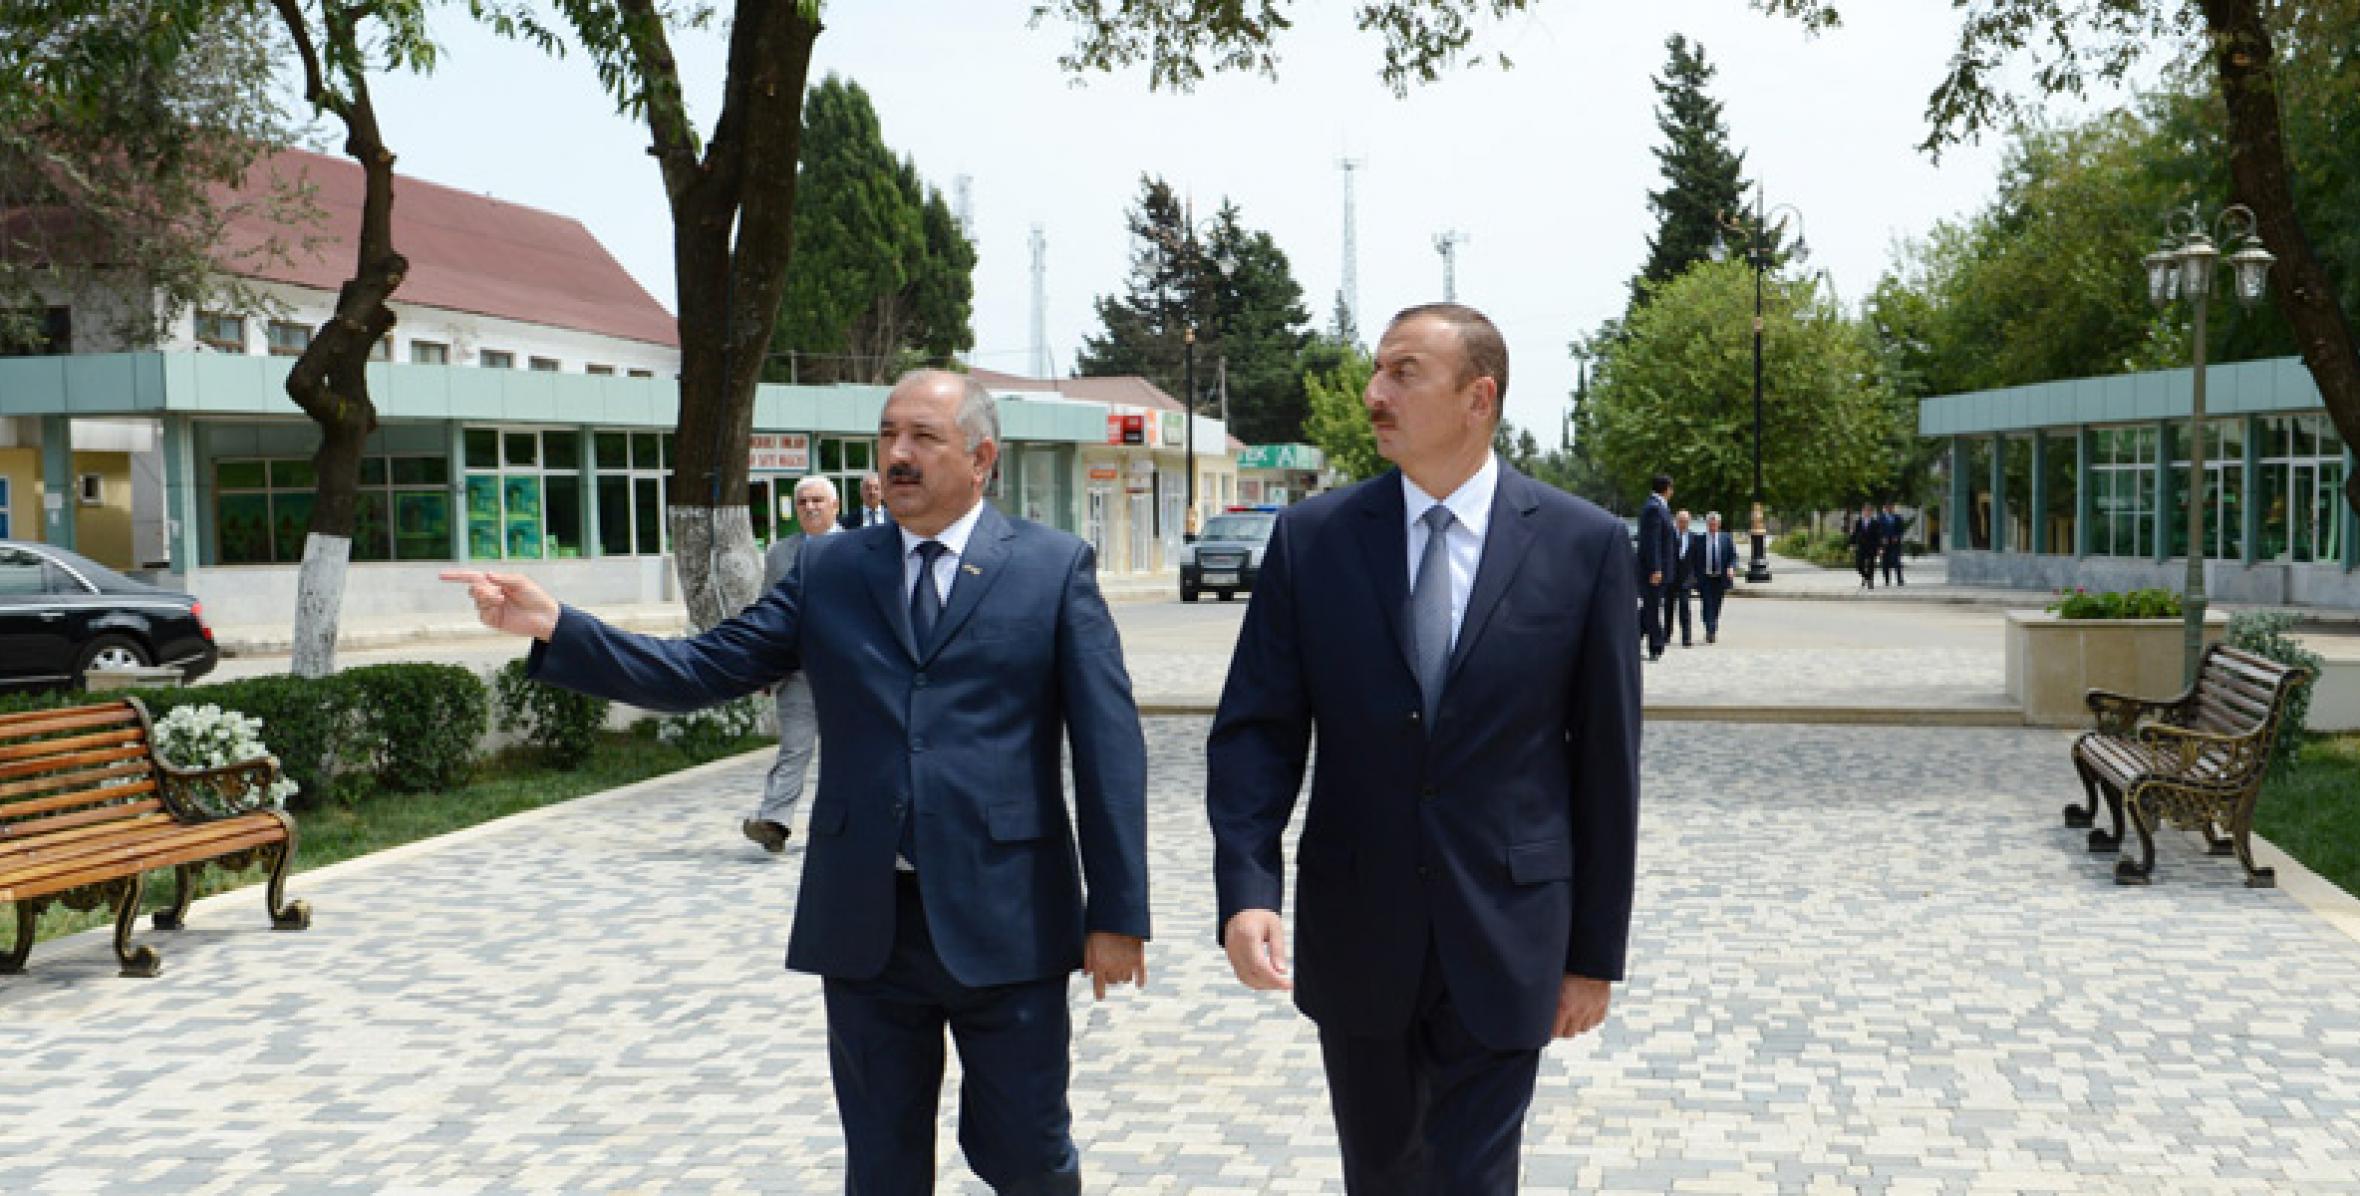 Ilham Aliyev reviewed the reconstruction of a recreation park in Jalilabad